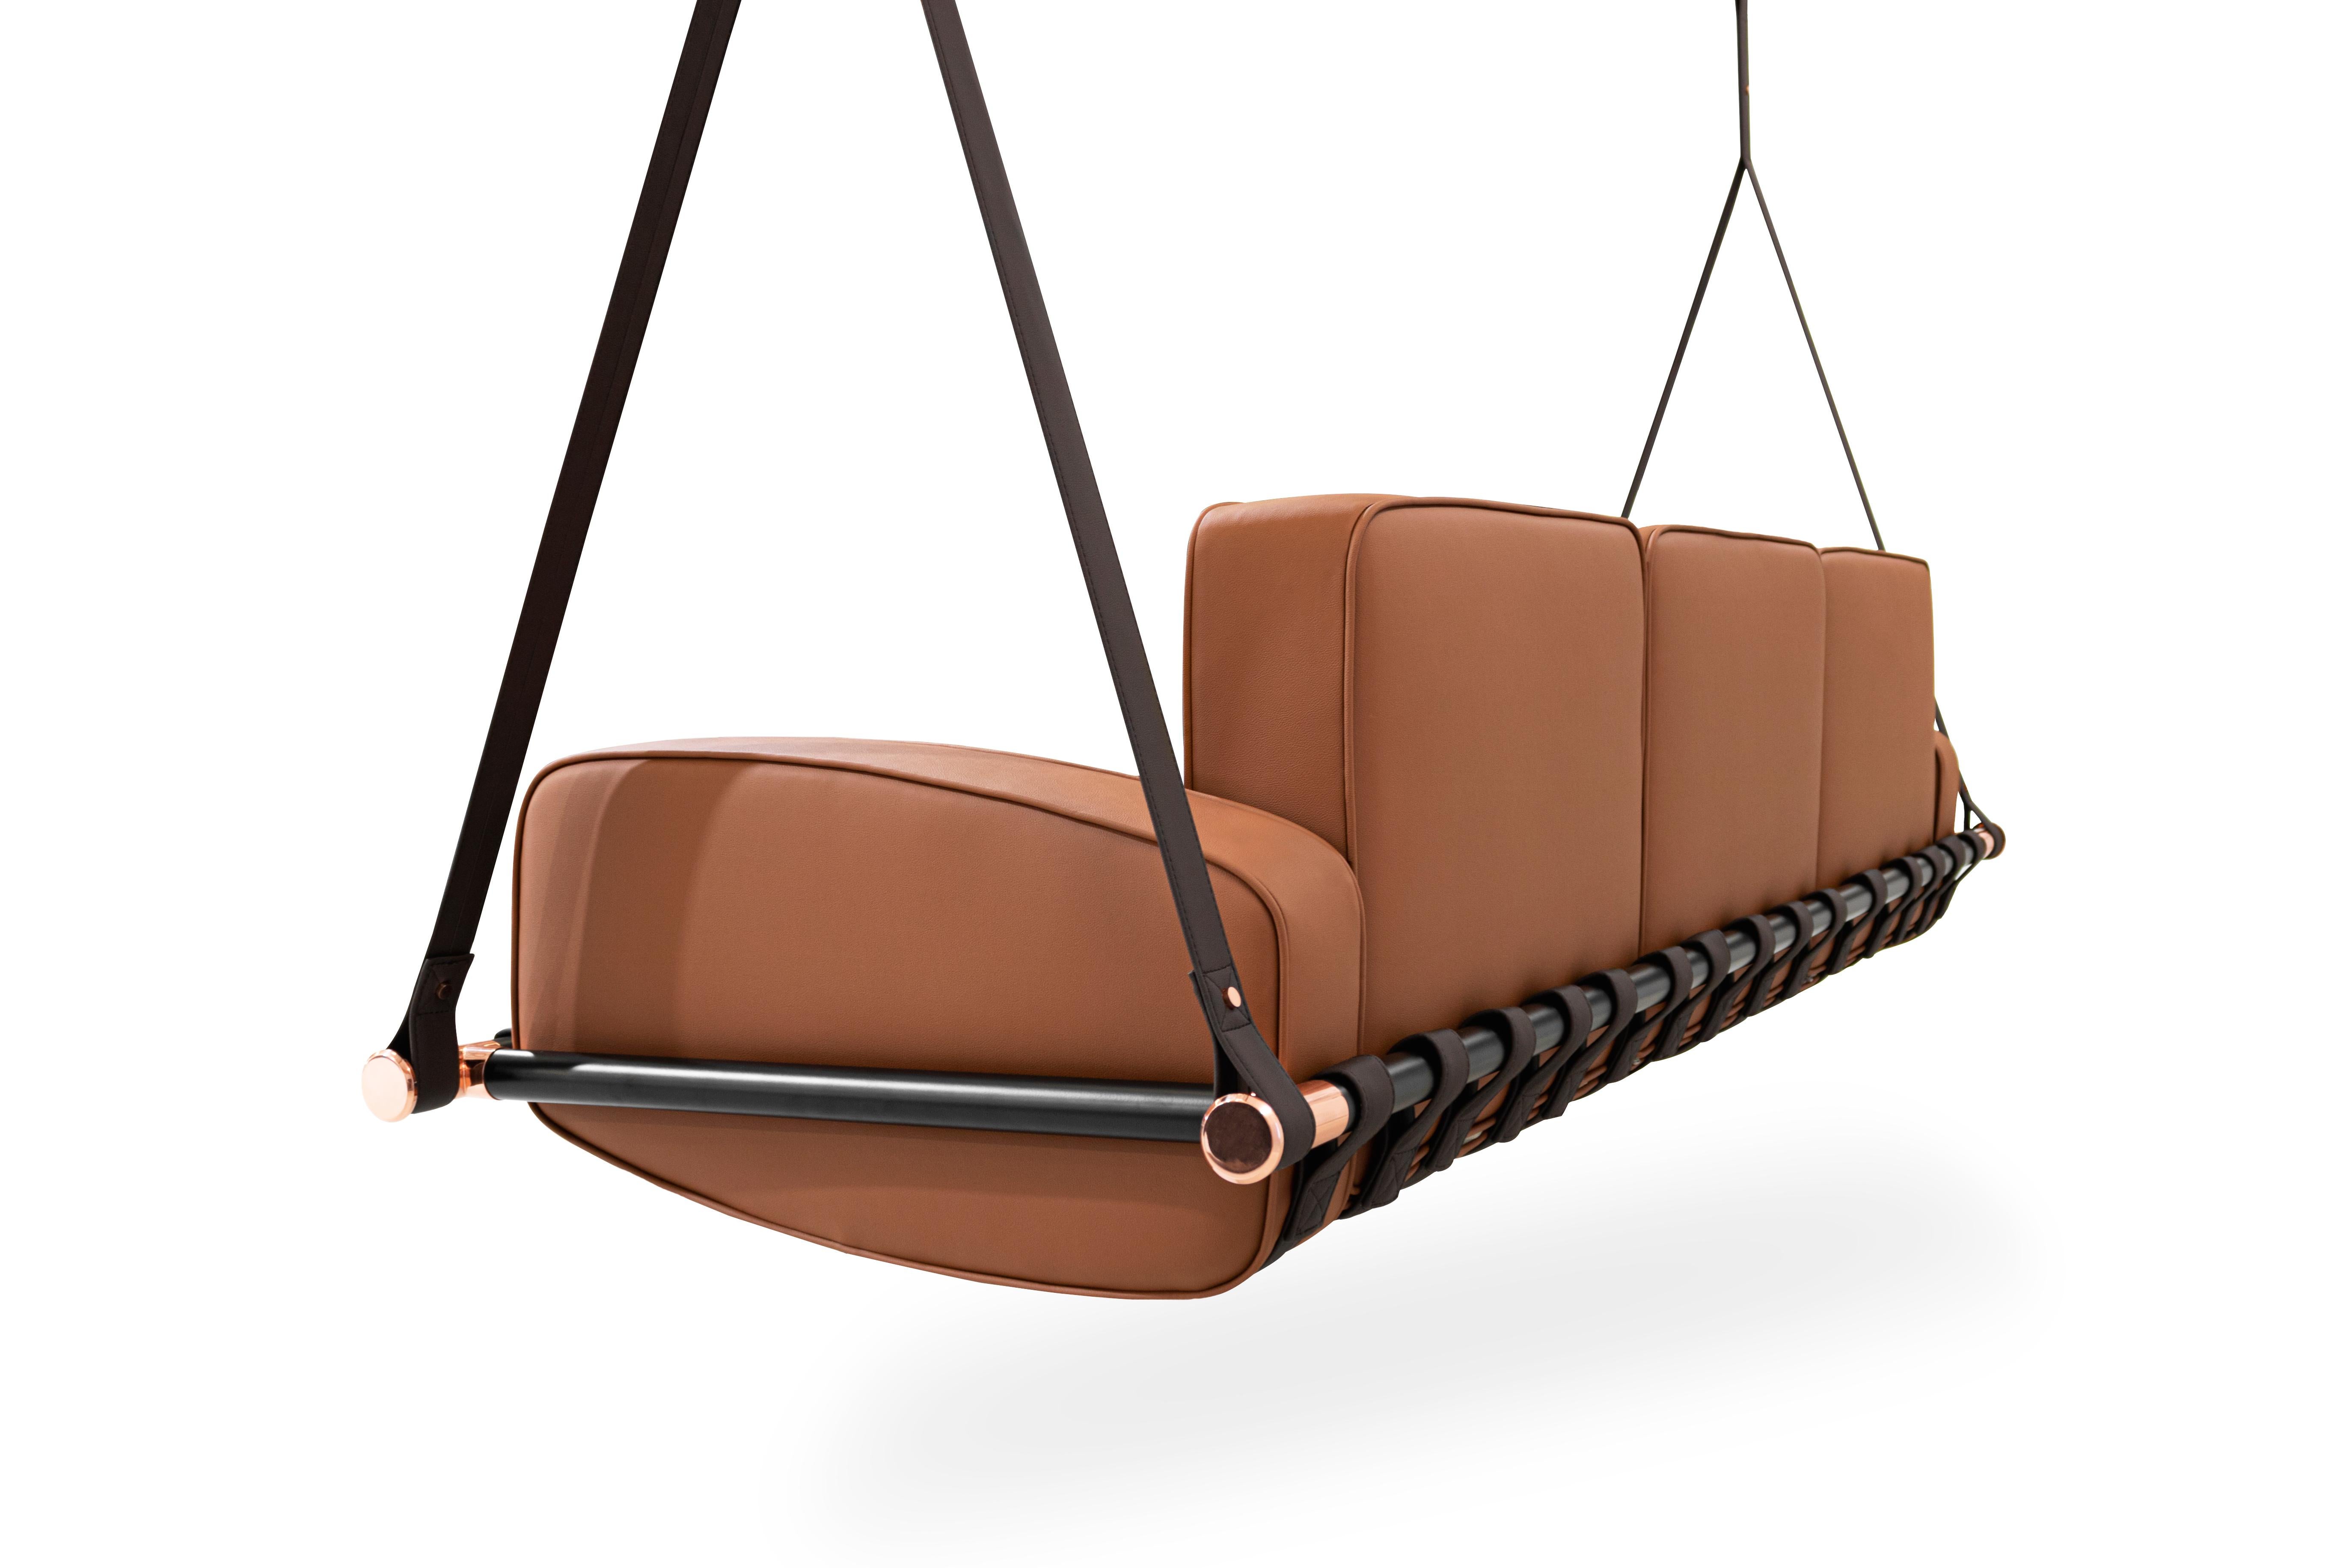 Fable - Hanging sofa by Myface

21st century contemporary outdoor hanging sofa made with suspension: Outdoor leather straps, Metallic, Structure: Black lacquered stainless steel, Upholstery: Acrylic fabric, Metallic Details: Gold plated 

Hold by